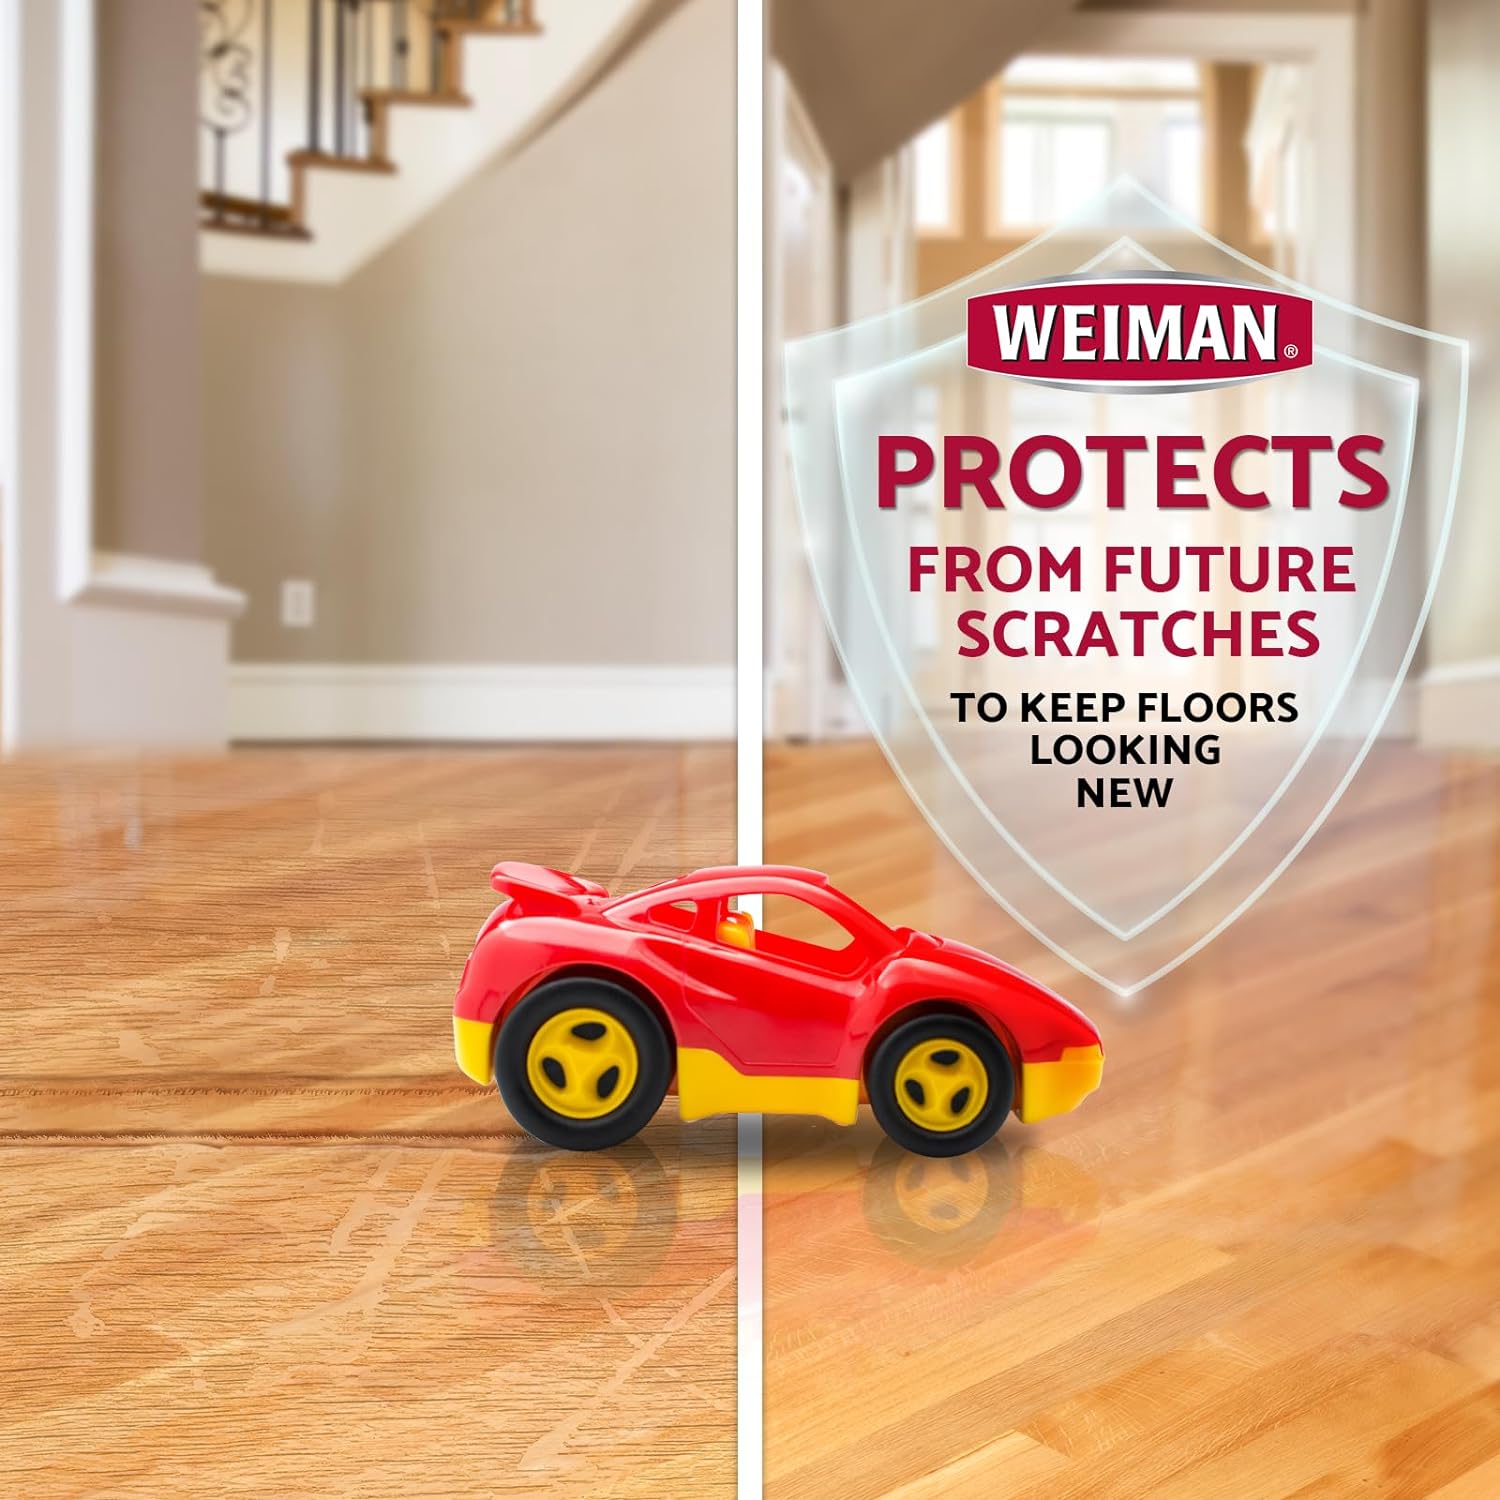 Weiman Wood Floor Polish and Restorer 32 Oz 3PC Bundle - High-Traffic Hardwood Floor, Natural Shine, Removes Scratches, Leaves Protective Layer : Health & Household